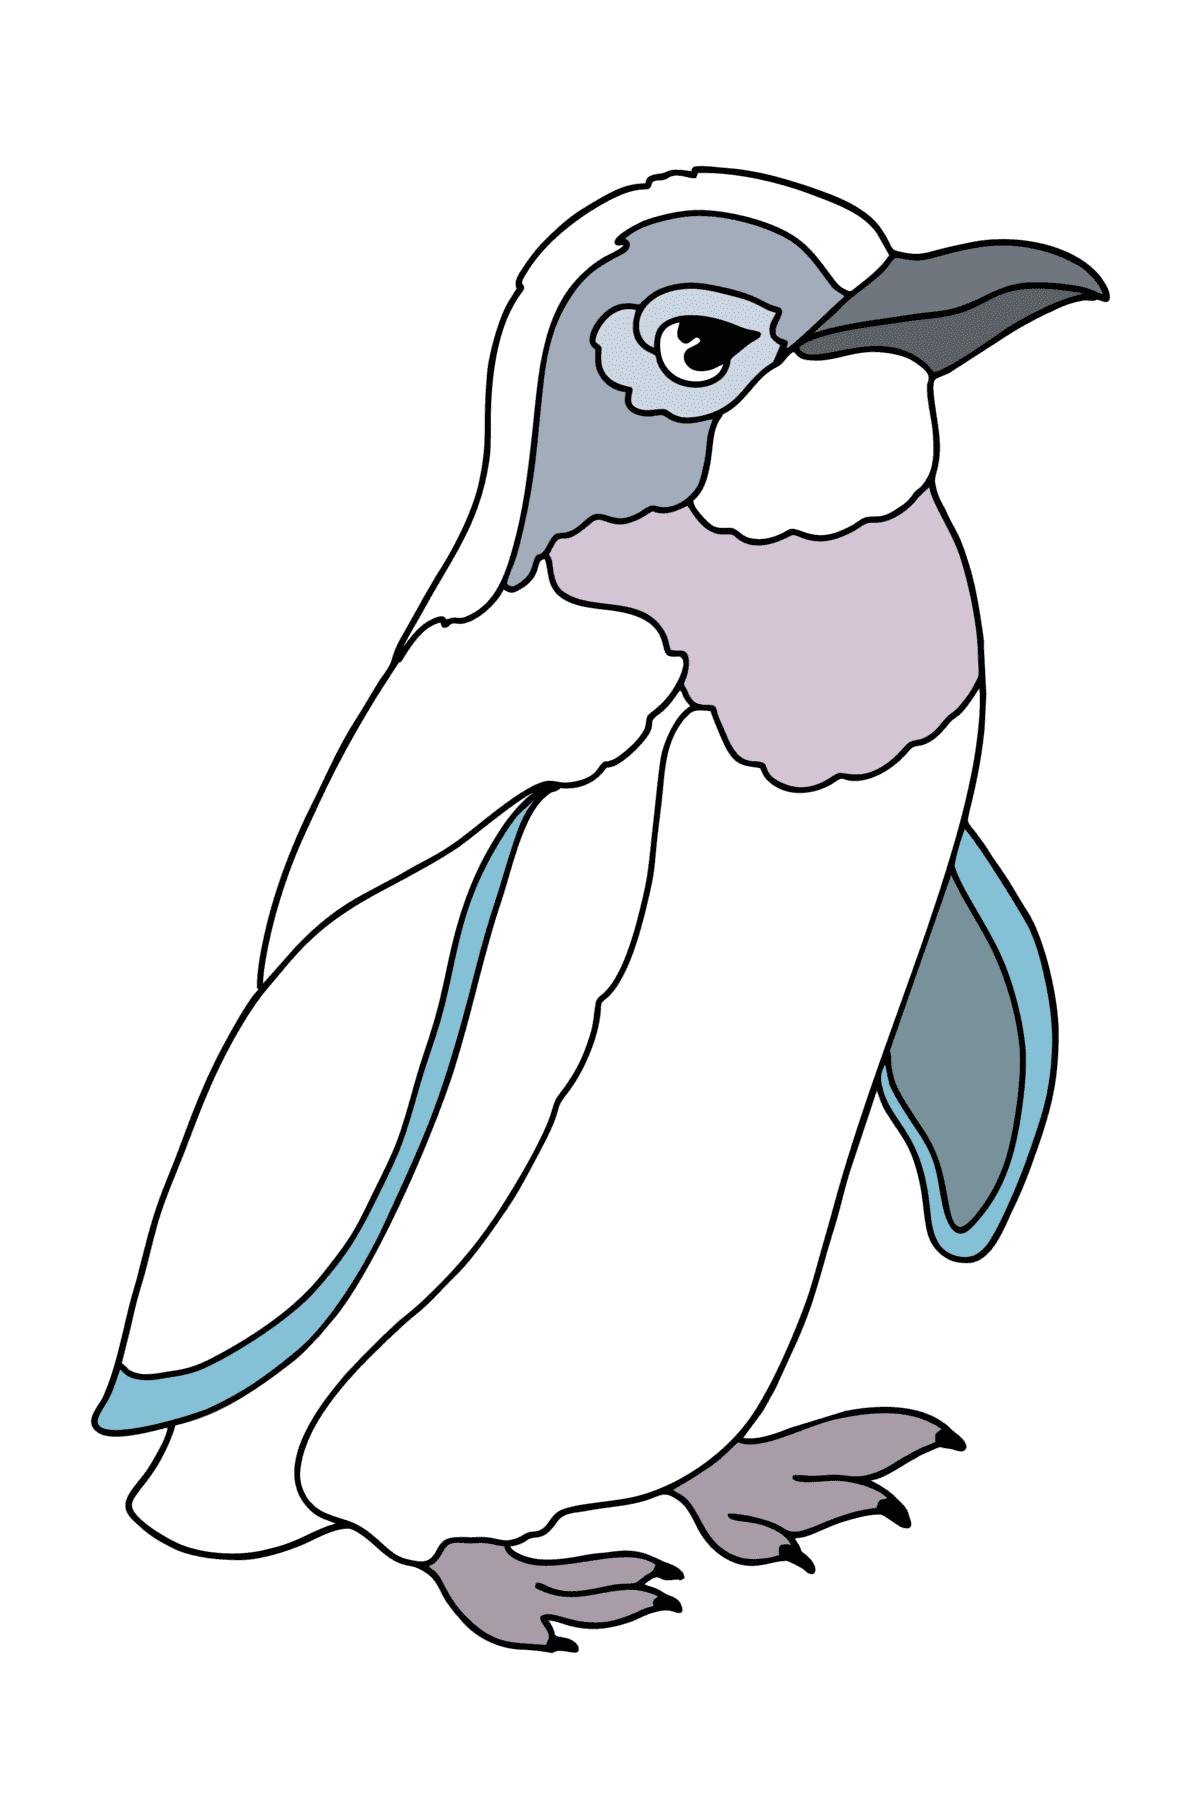 Blue Penguin сoloring page - Coloring Pages for Kids